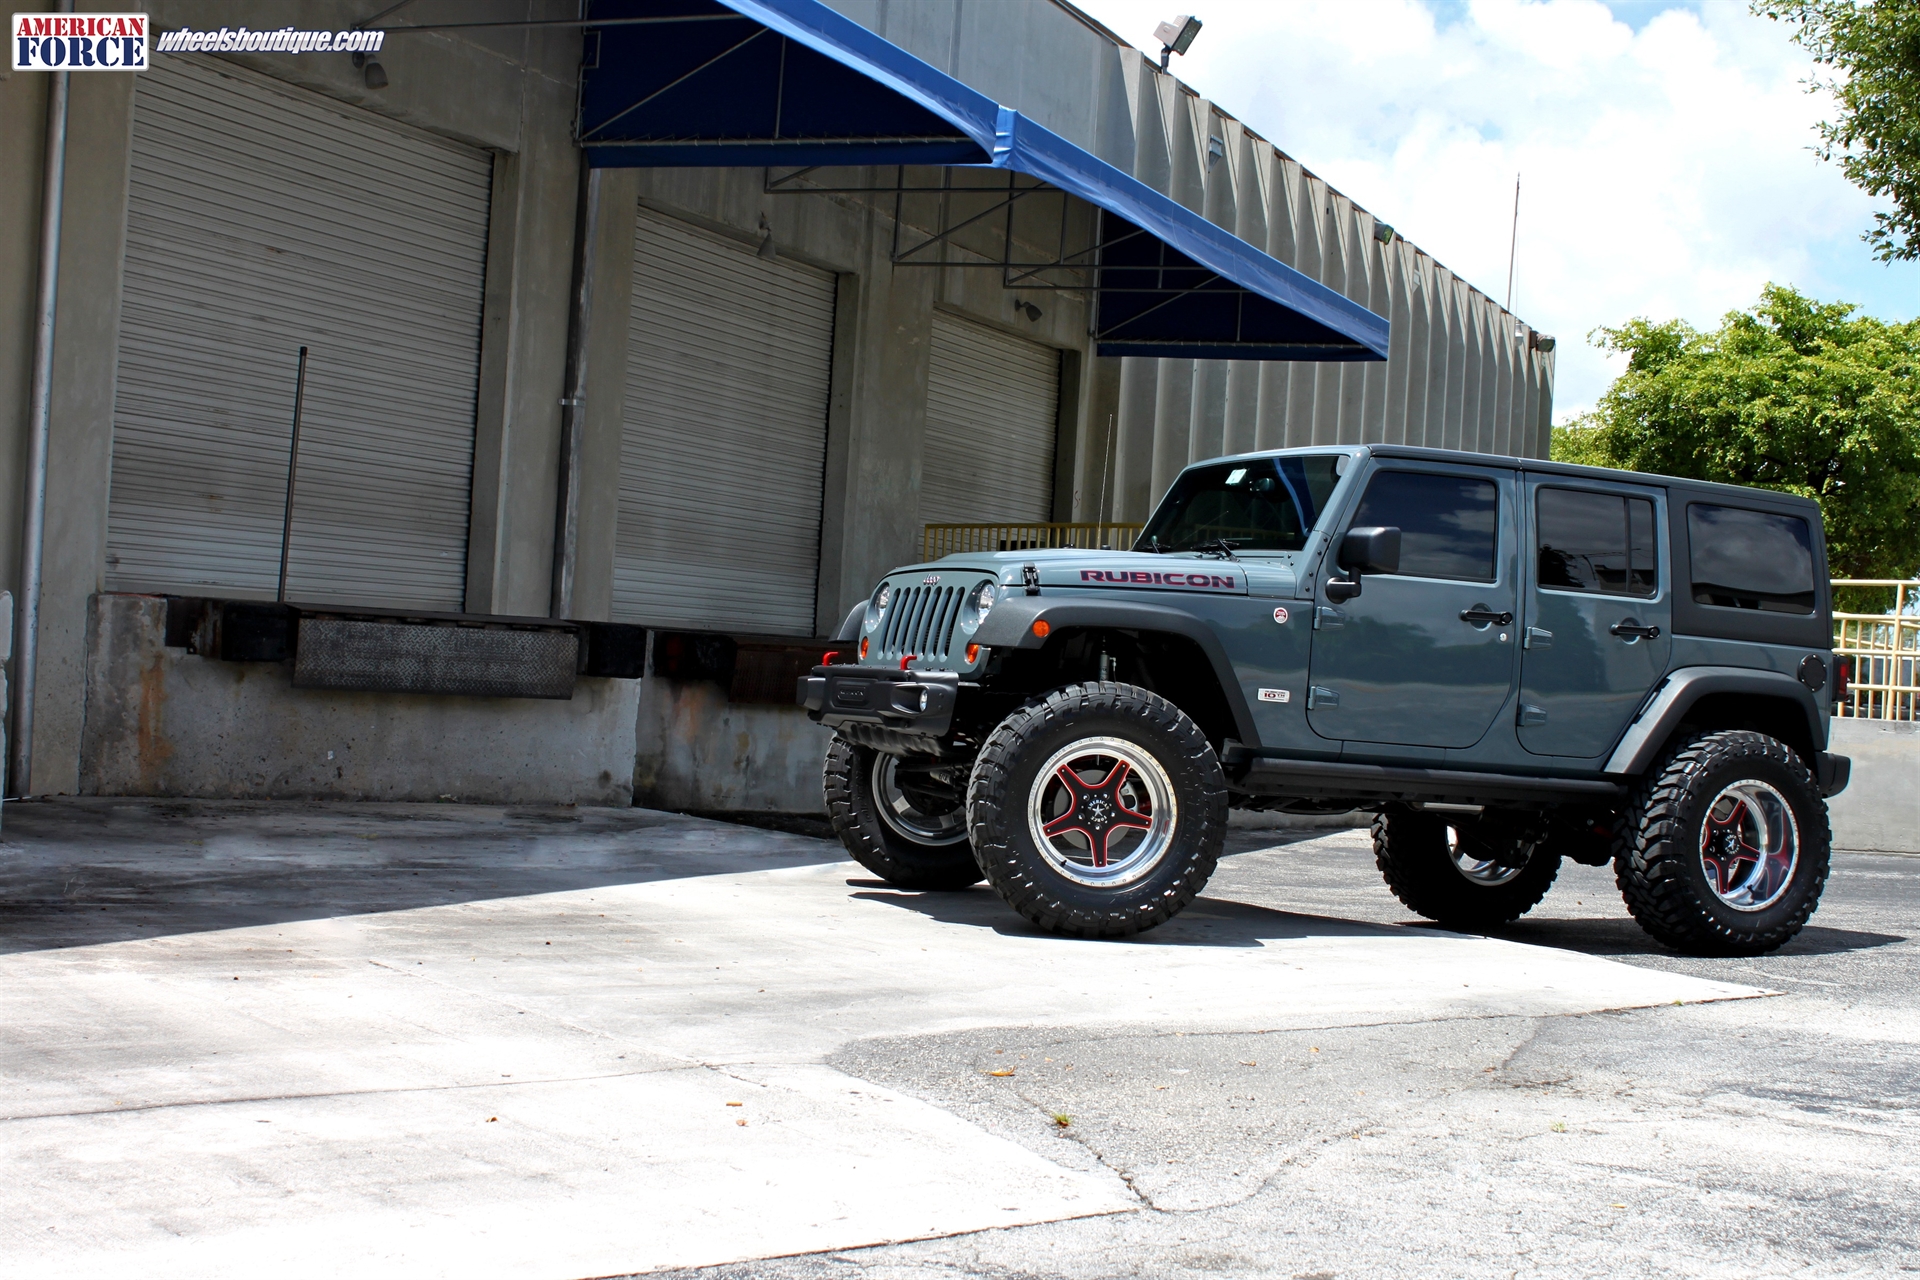 Jeep Wrangler Rubicon 10th Annv. on American Force Wheels – Wheels Boutique